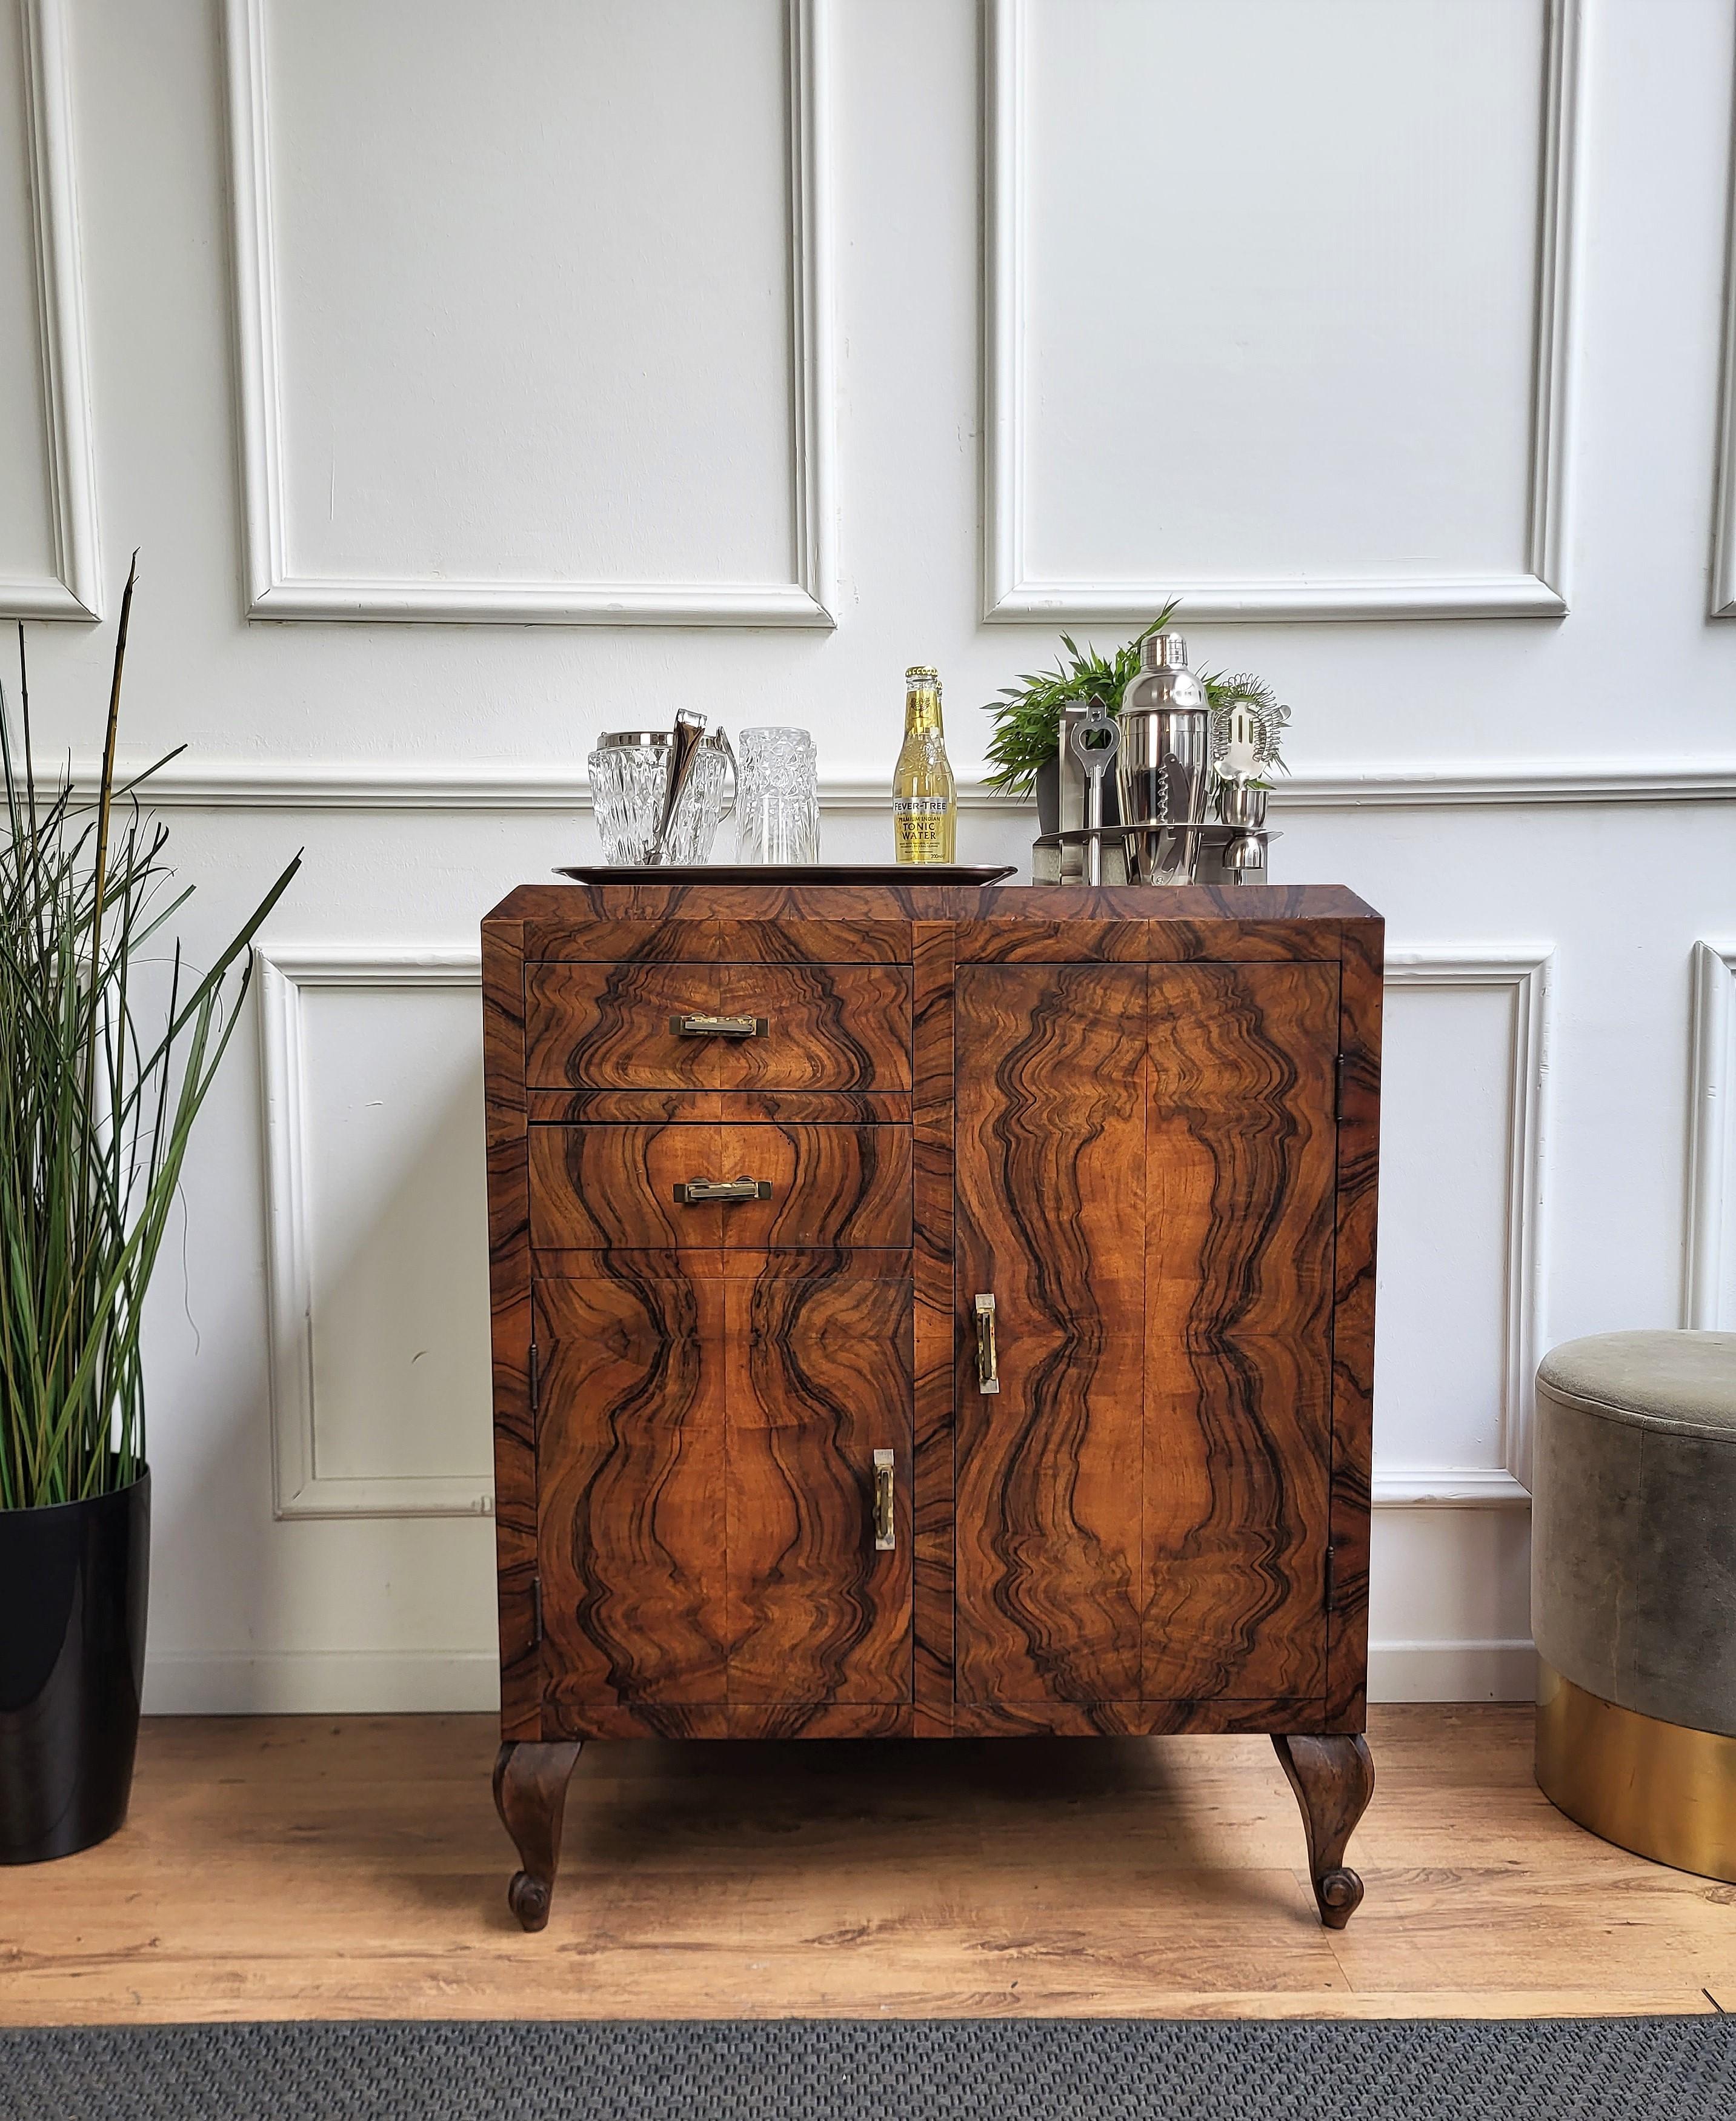 Unique and very elegant Italian Art Deco Mid-Century Modern dry bar cabinet cart, in root burl walnut with double front door and two drawers. When opened the interior part on the left has a wooden shelf. The piece is highlighted by the original